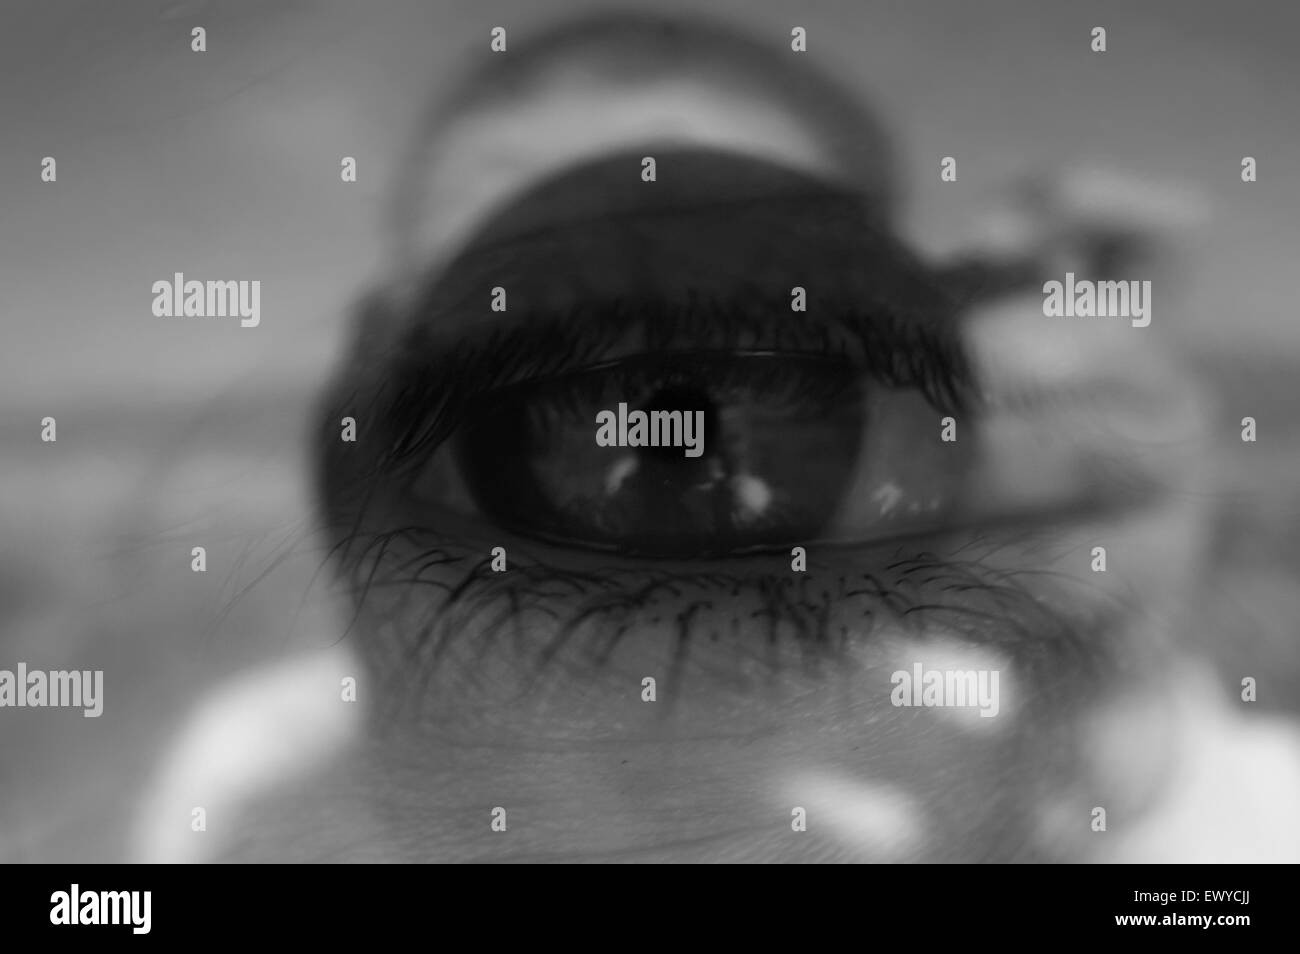 'Photographers eye' conceptual image.BW version.Eye reflected on glass surface showing photographer pressing the shutter button. Stock Photo